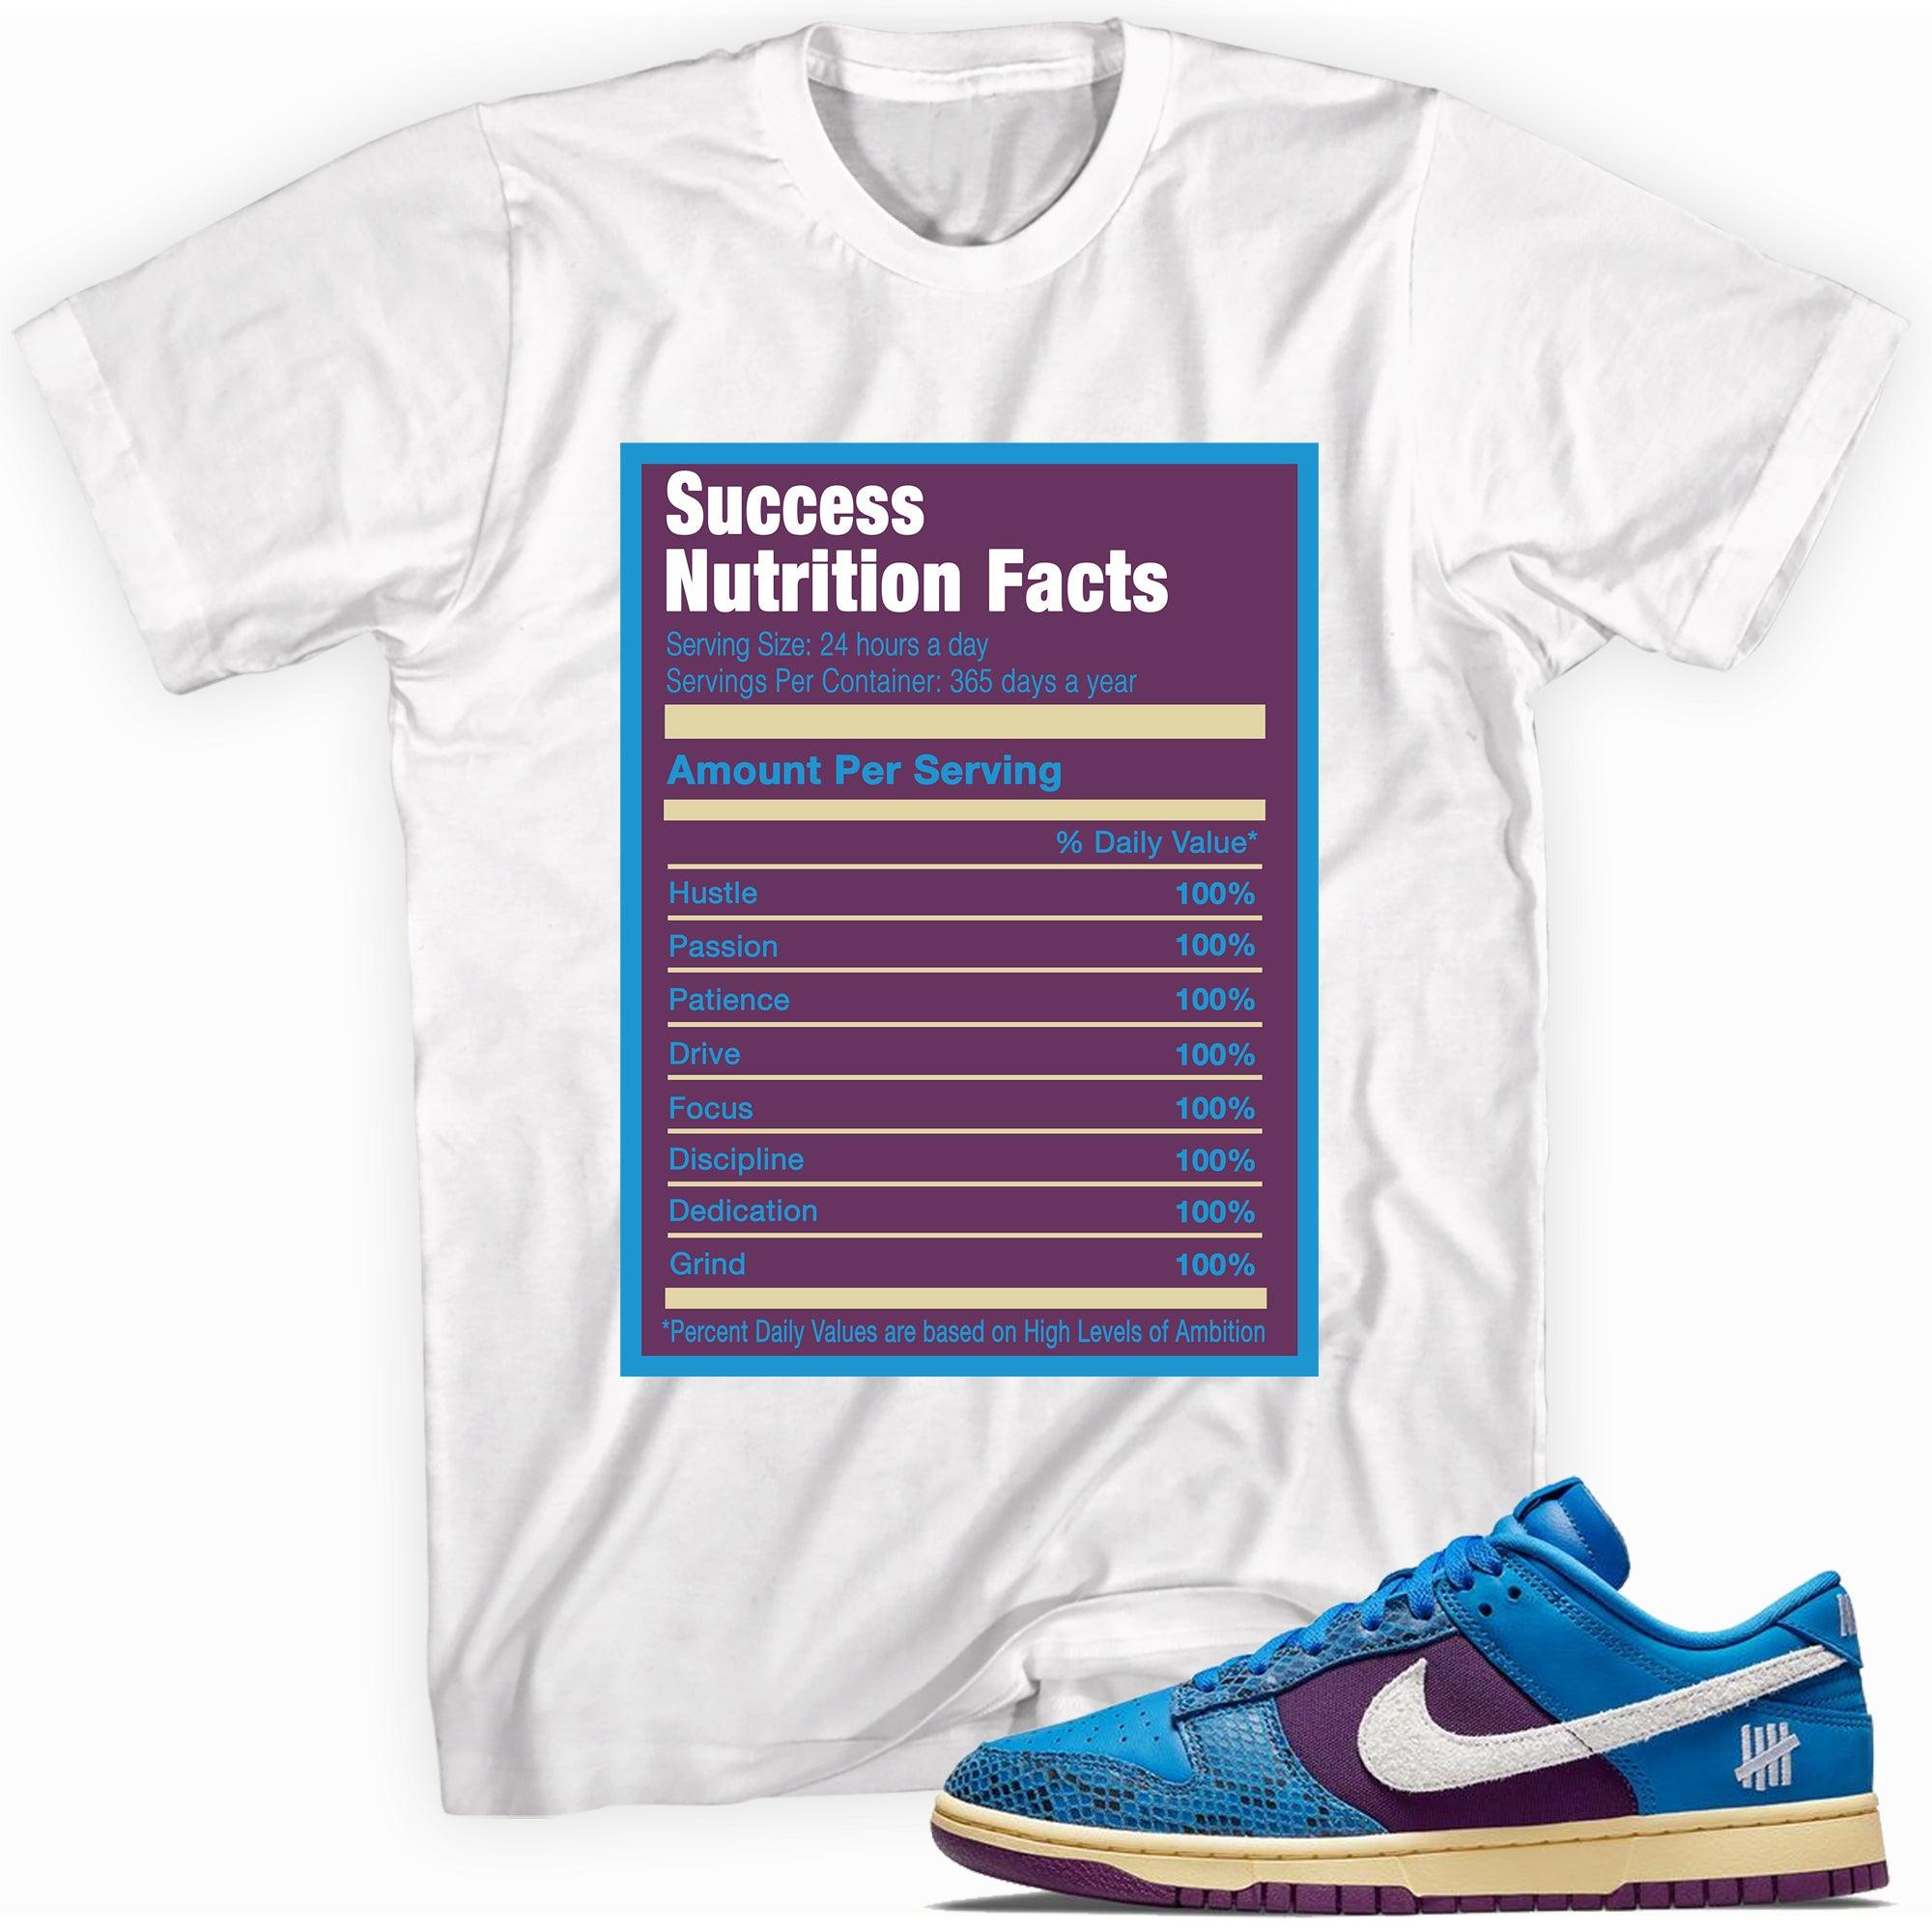 Success Nutrition Facts Shirt Nike Dunks Low Undefeated 5 On It Dunk vs AF1 photo